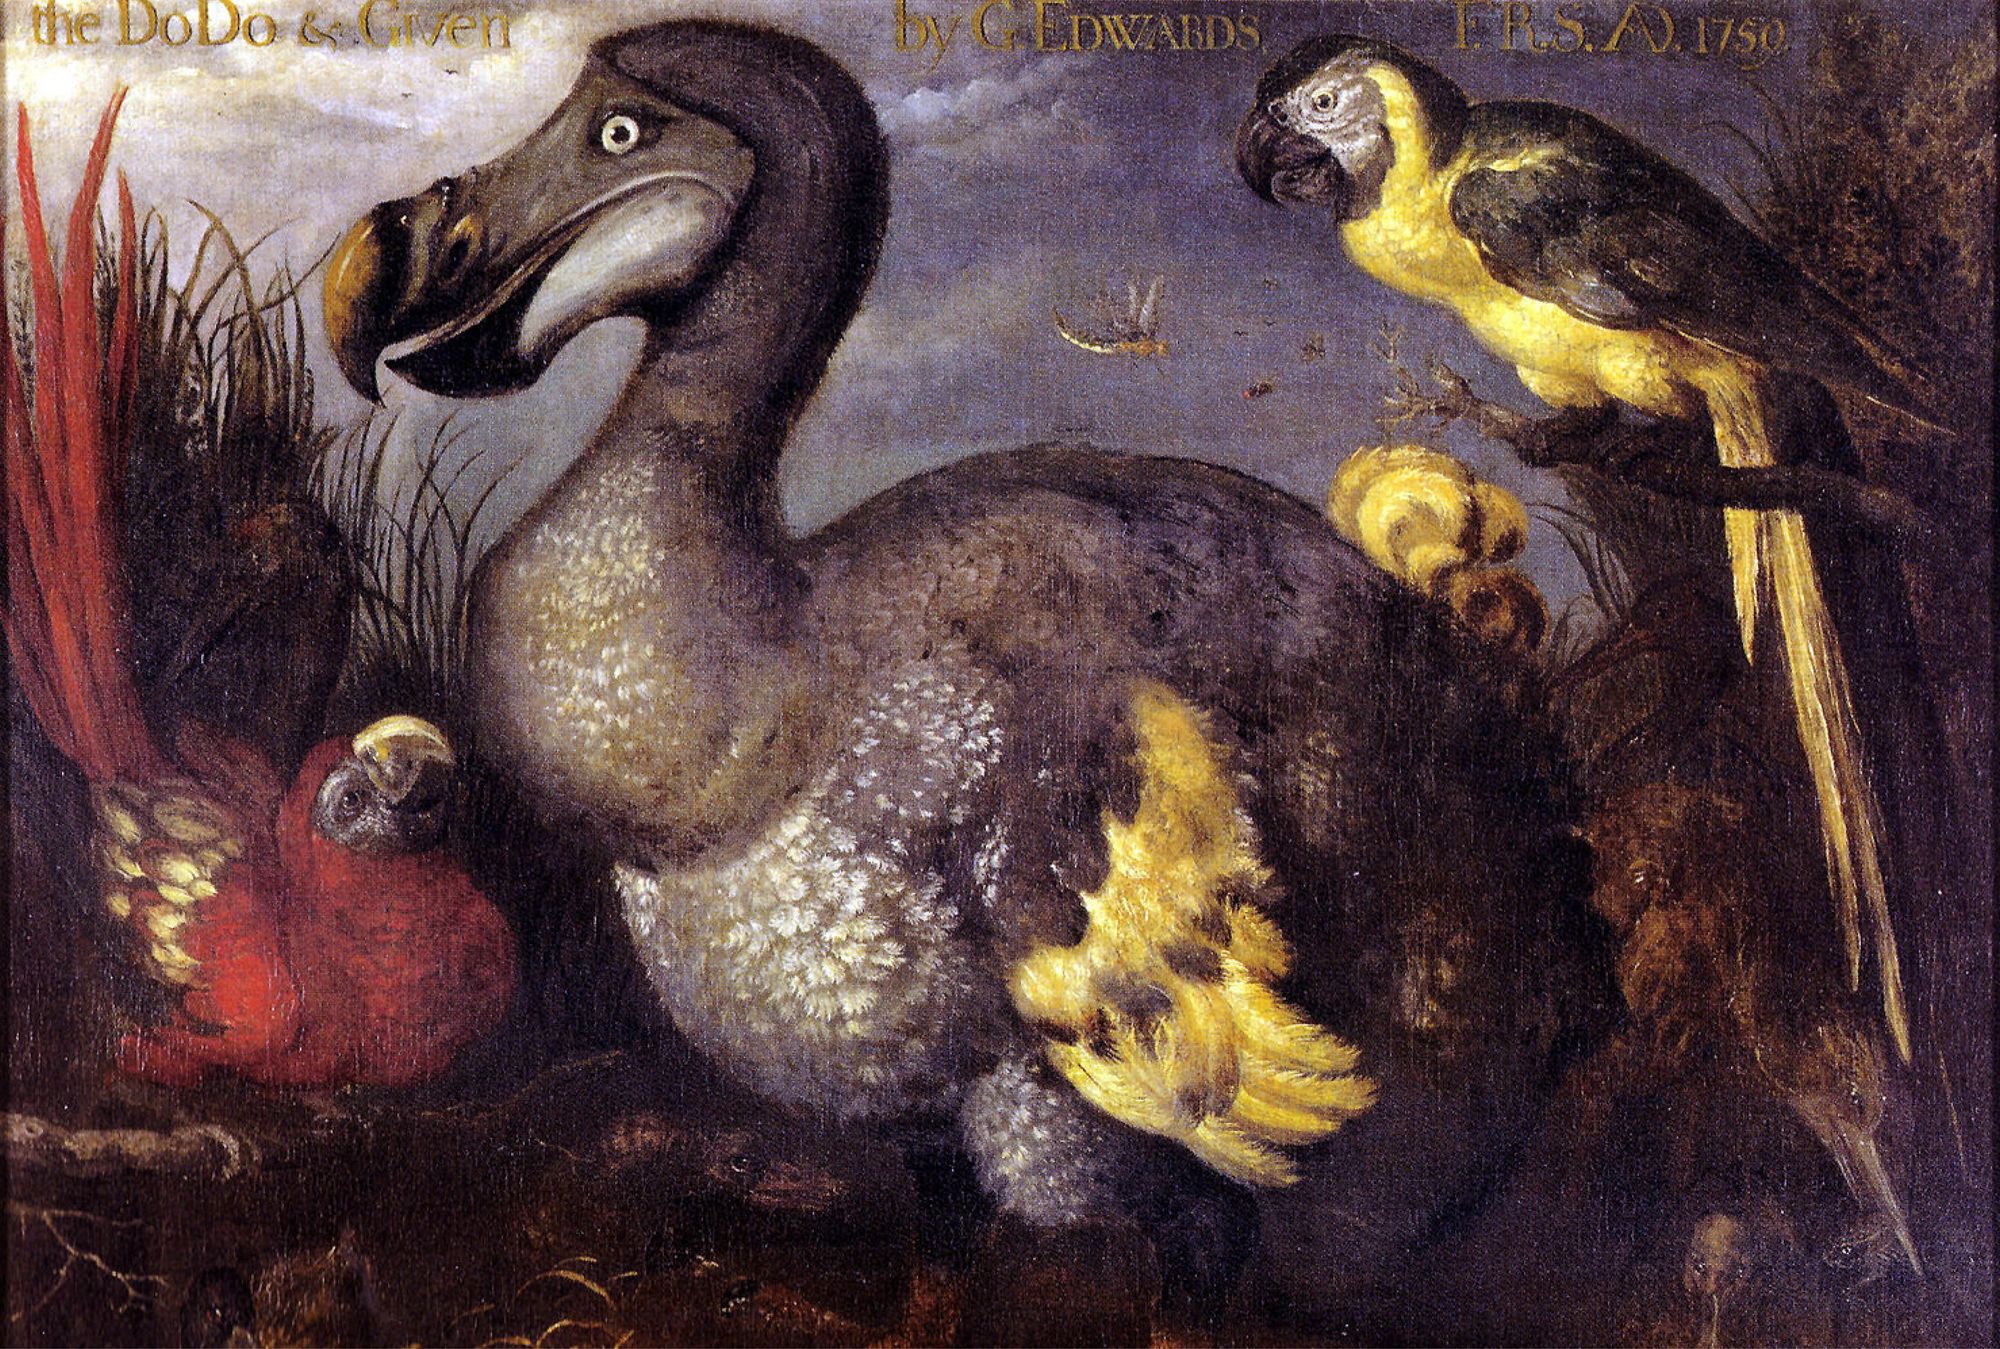 Fabricating the Dodo: the Making and Unmaking of a Bird